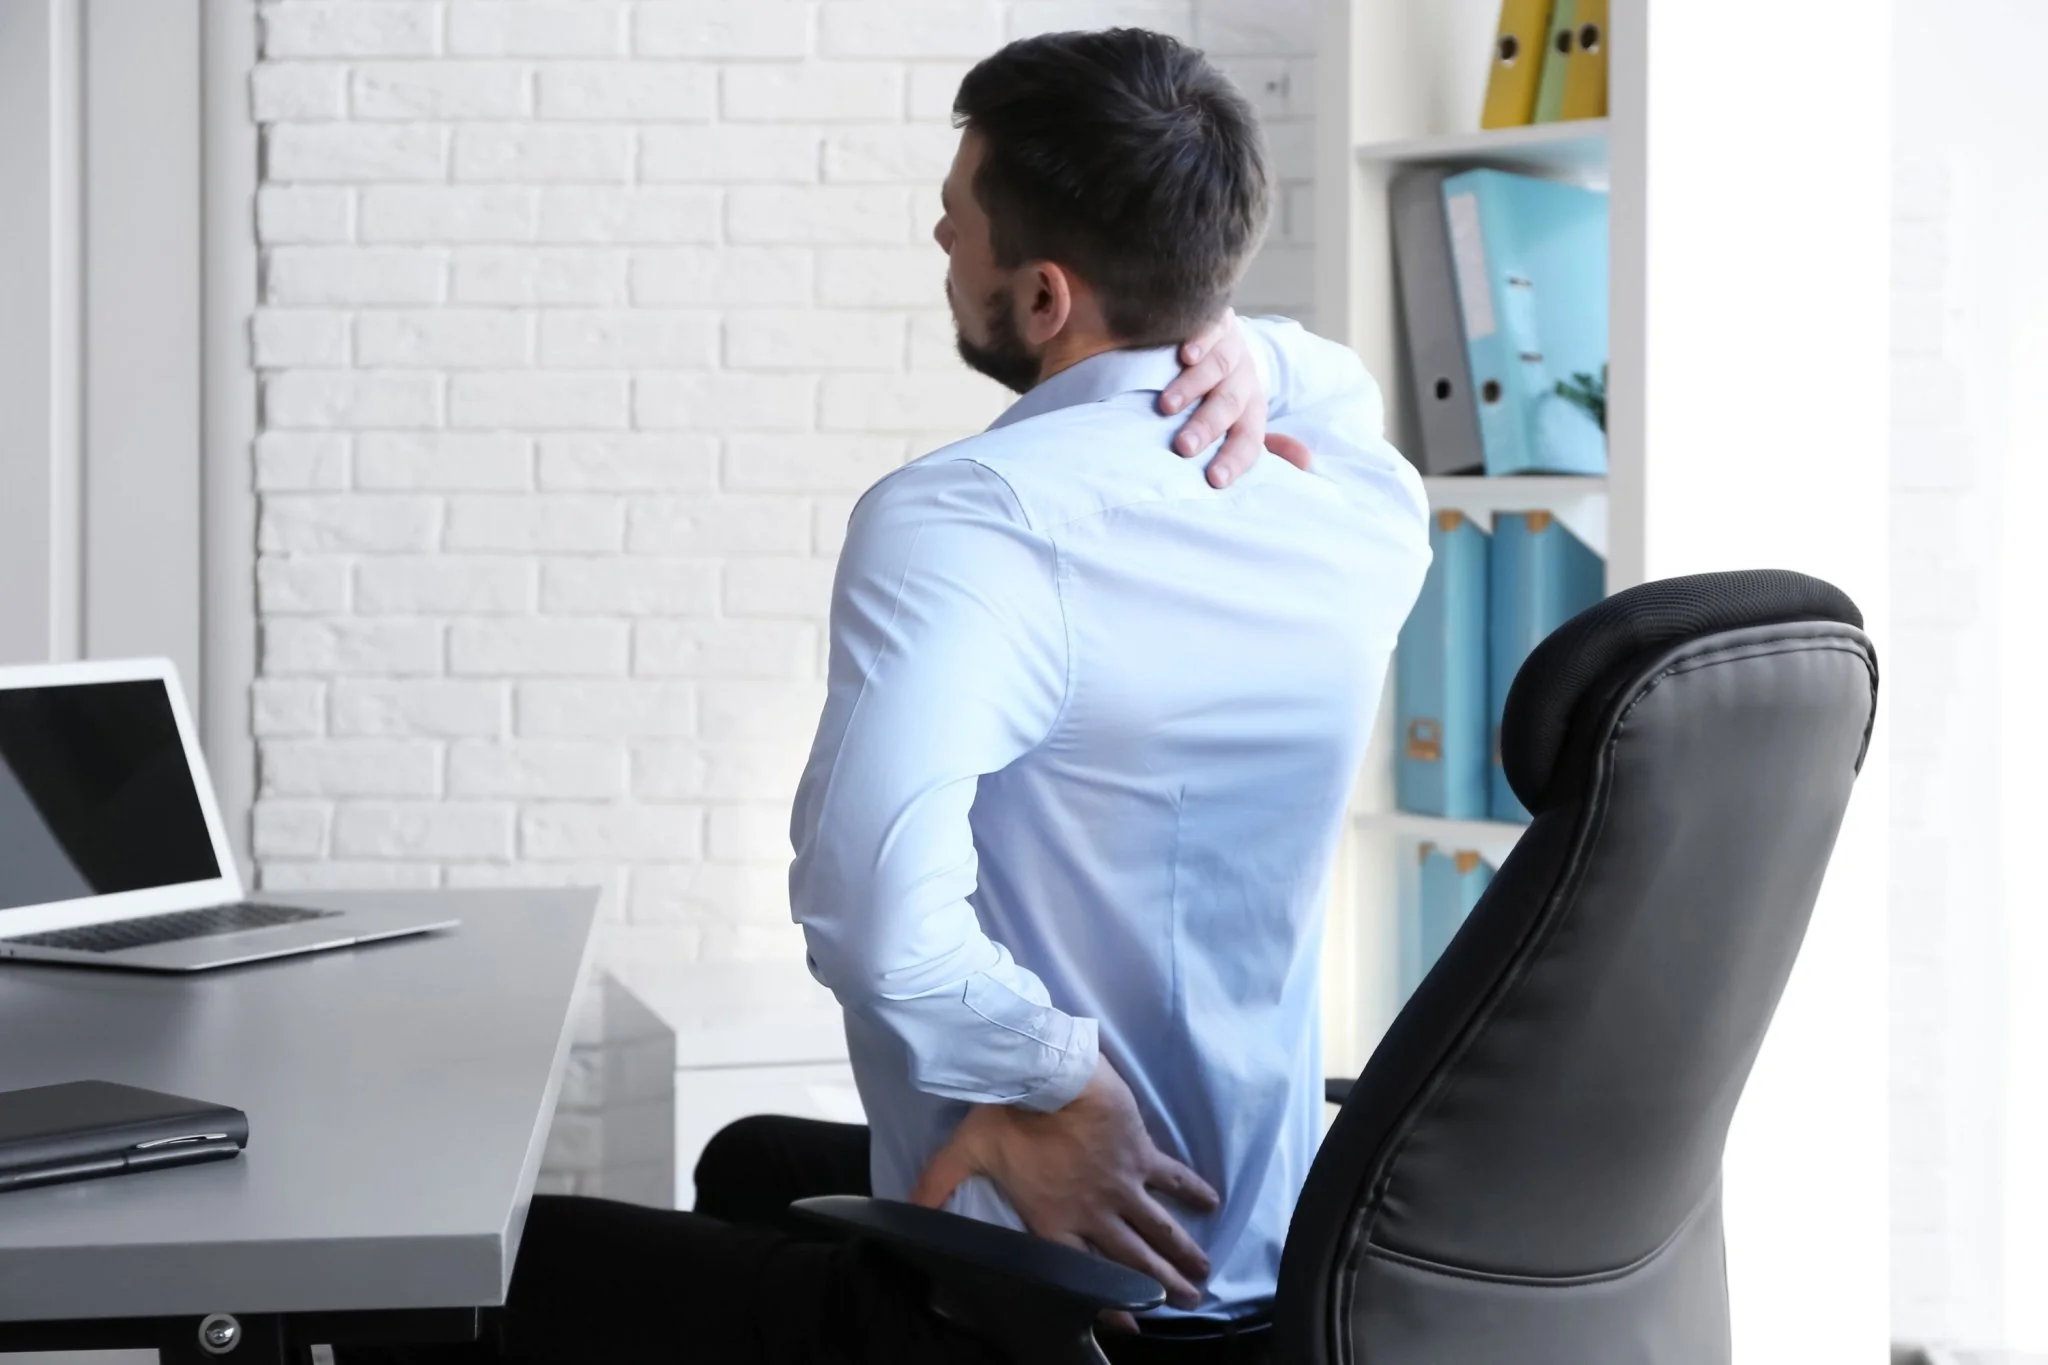 Treatments of Physical and emotional pain induced by prolonged sitting habits